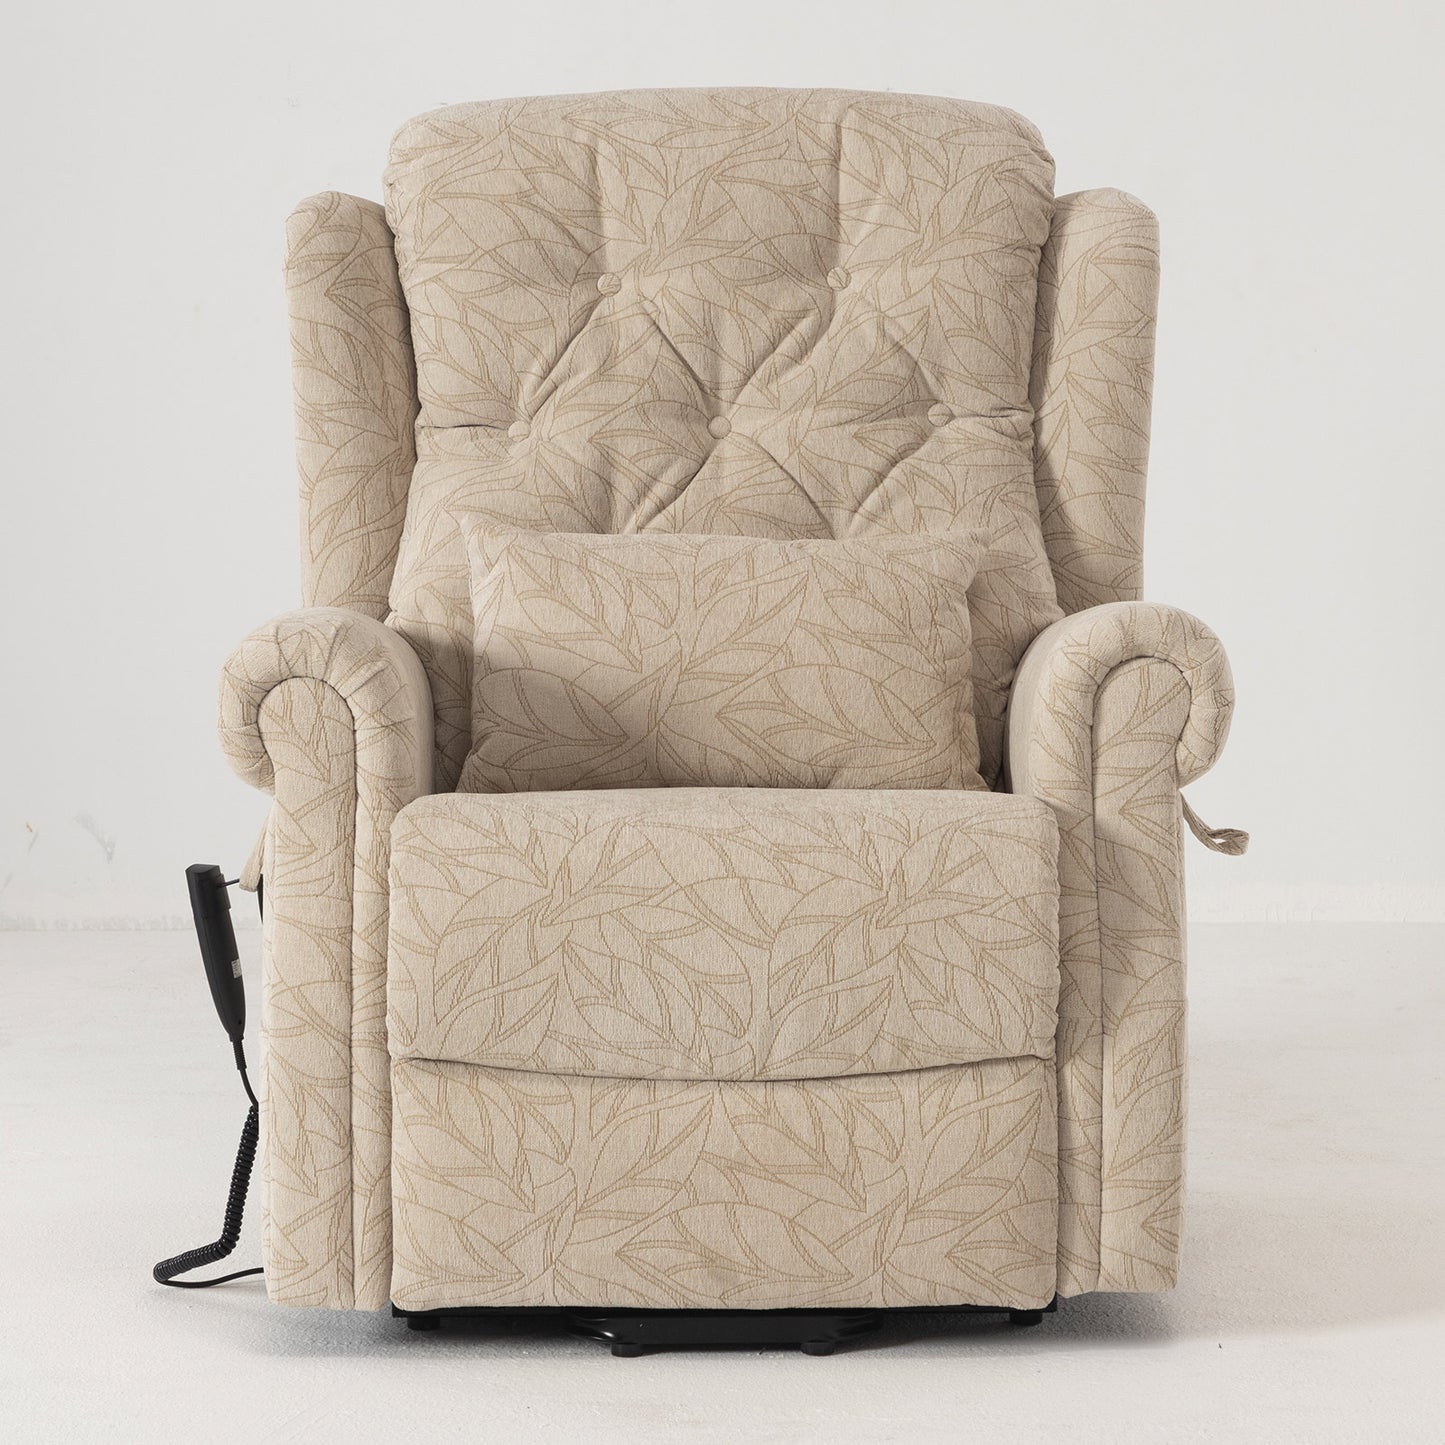 Infinite Postions Recliner Lift Chair With Massage And Heat(Lay Flat)